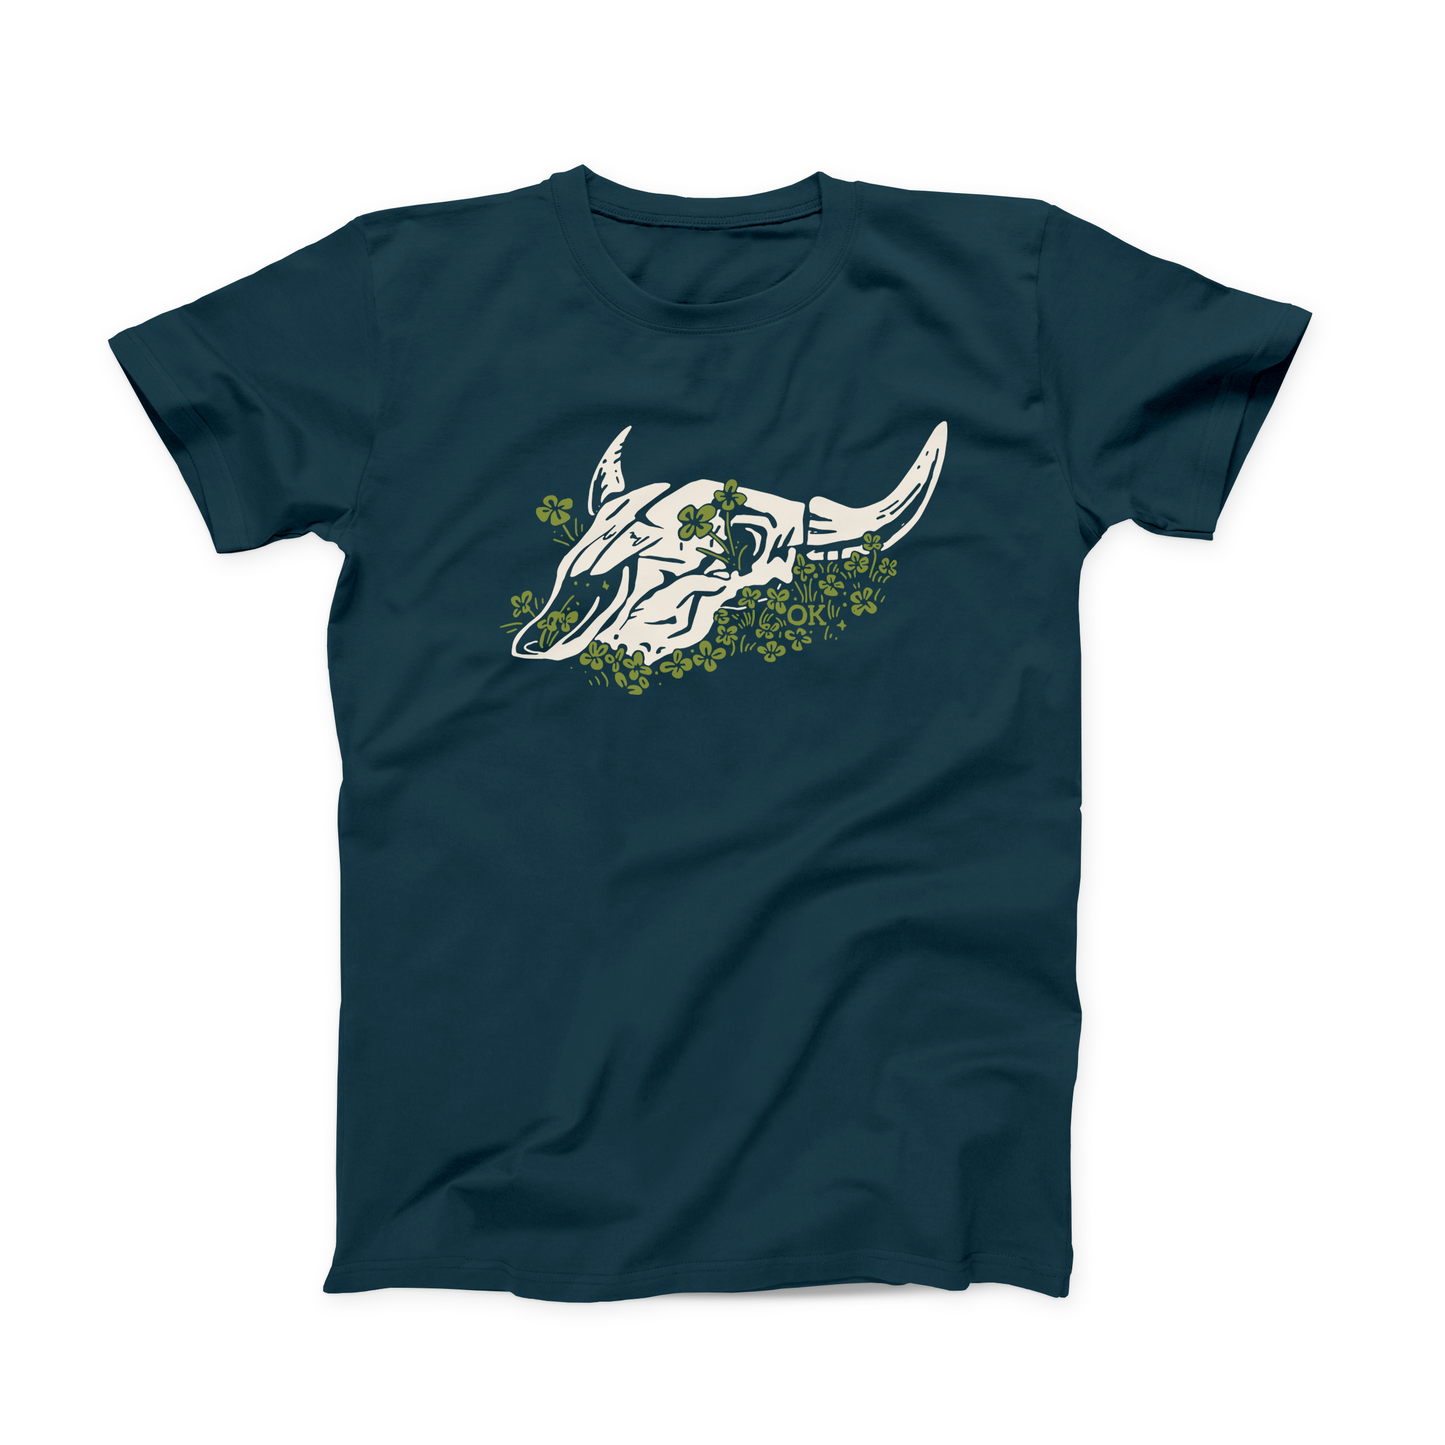 Deep Teal colored Oklahoma T-shirt. Screen printed across the chest is a white steer skull in a bed of green clover. Hidden in the clover is a small "OK" in the same green color. 